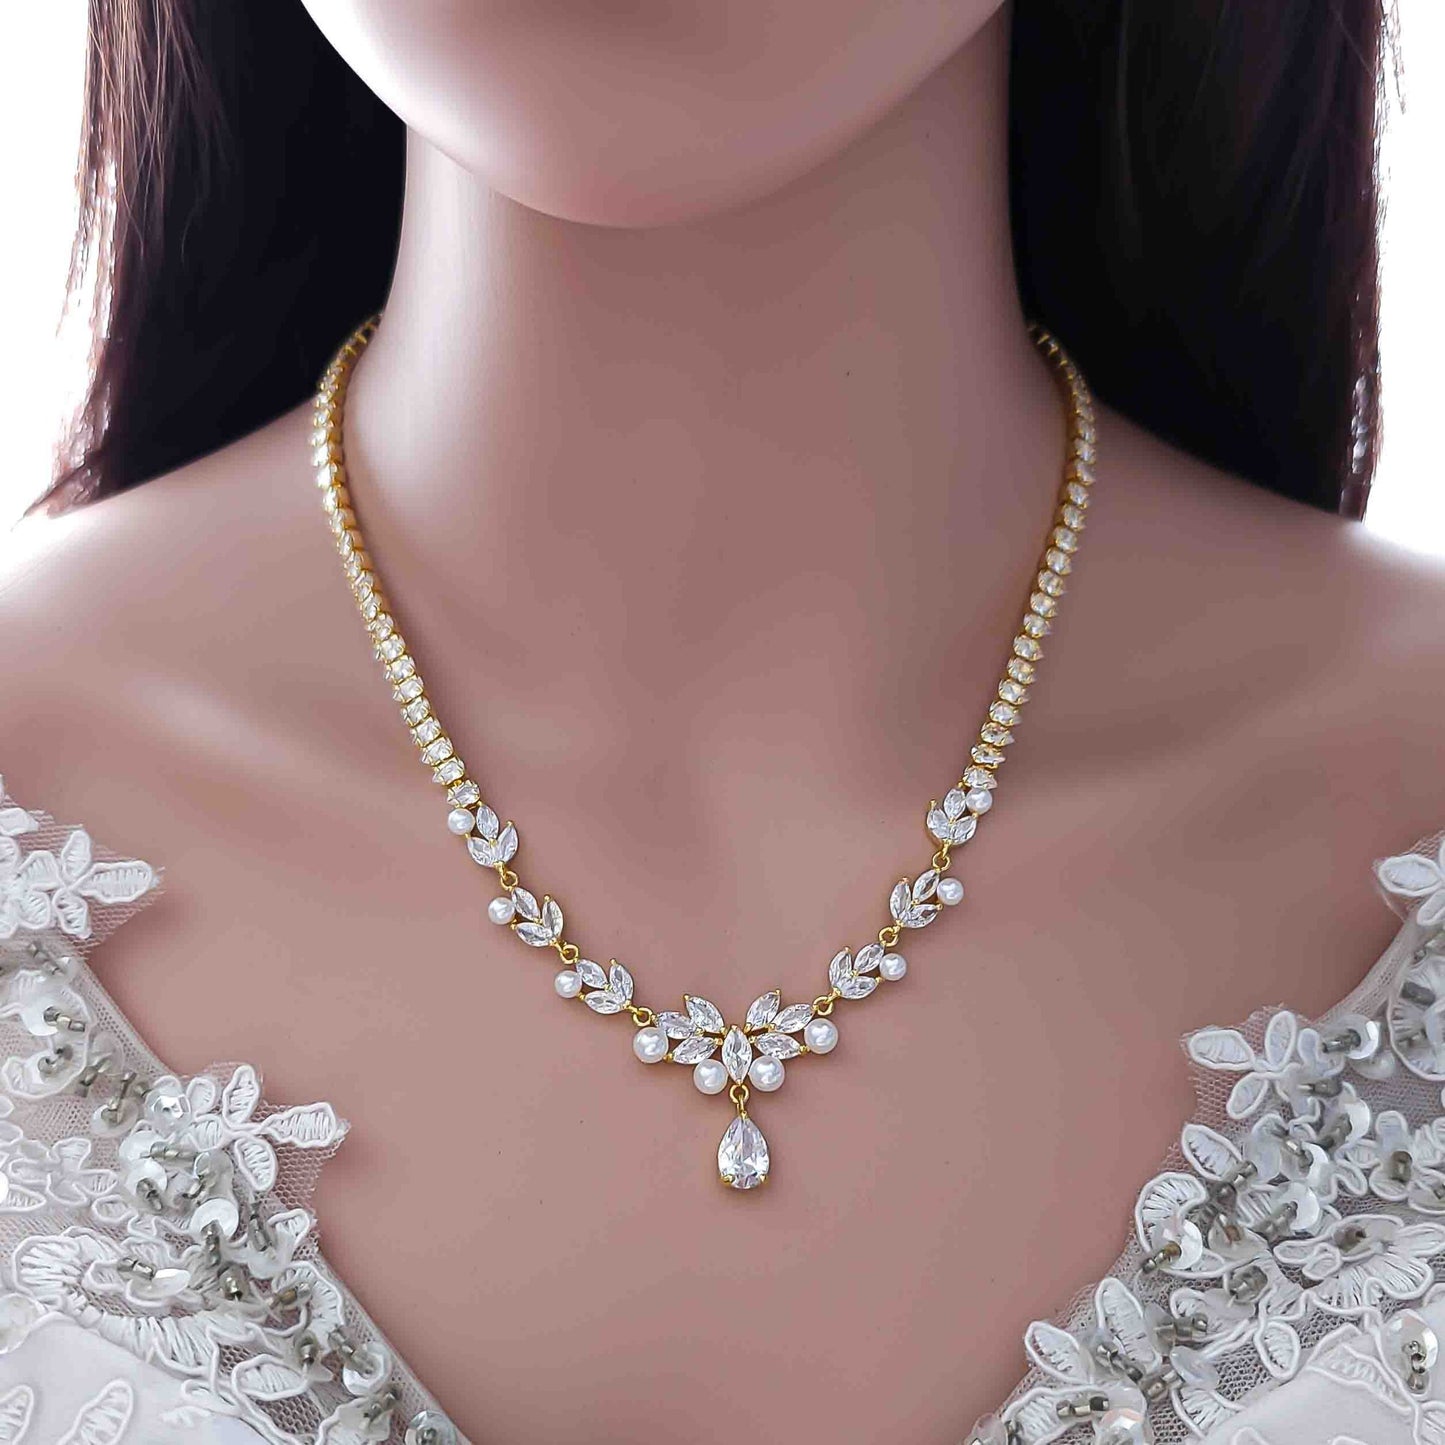 Bridal Pearl Necklace Set in Gold-Jenna